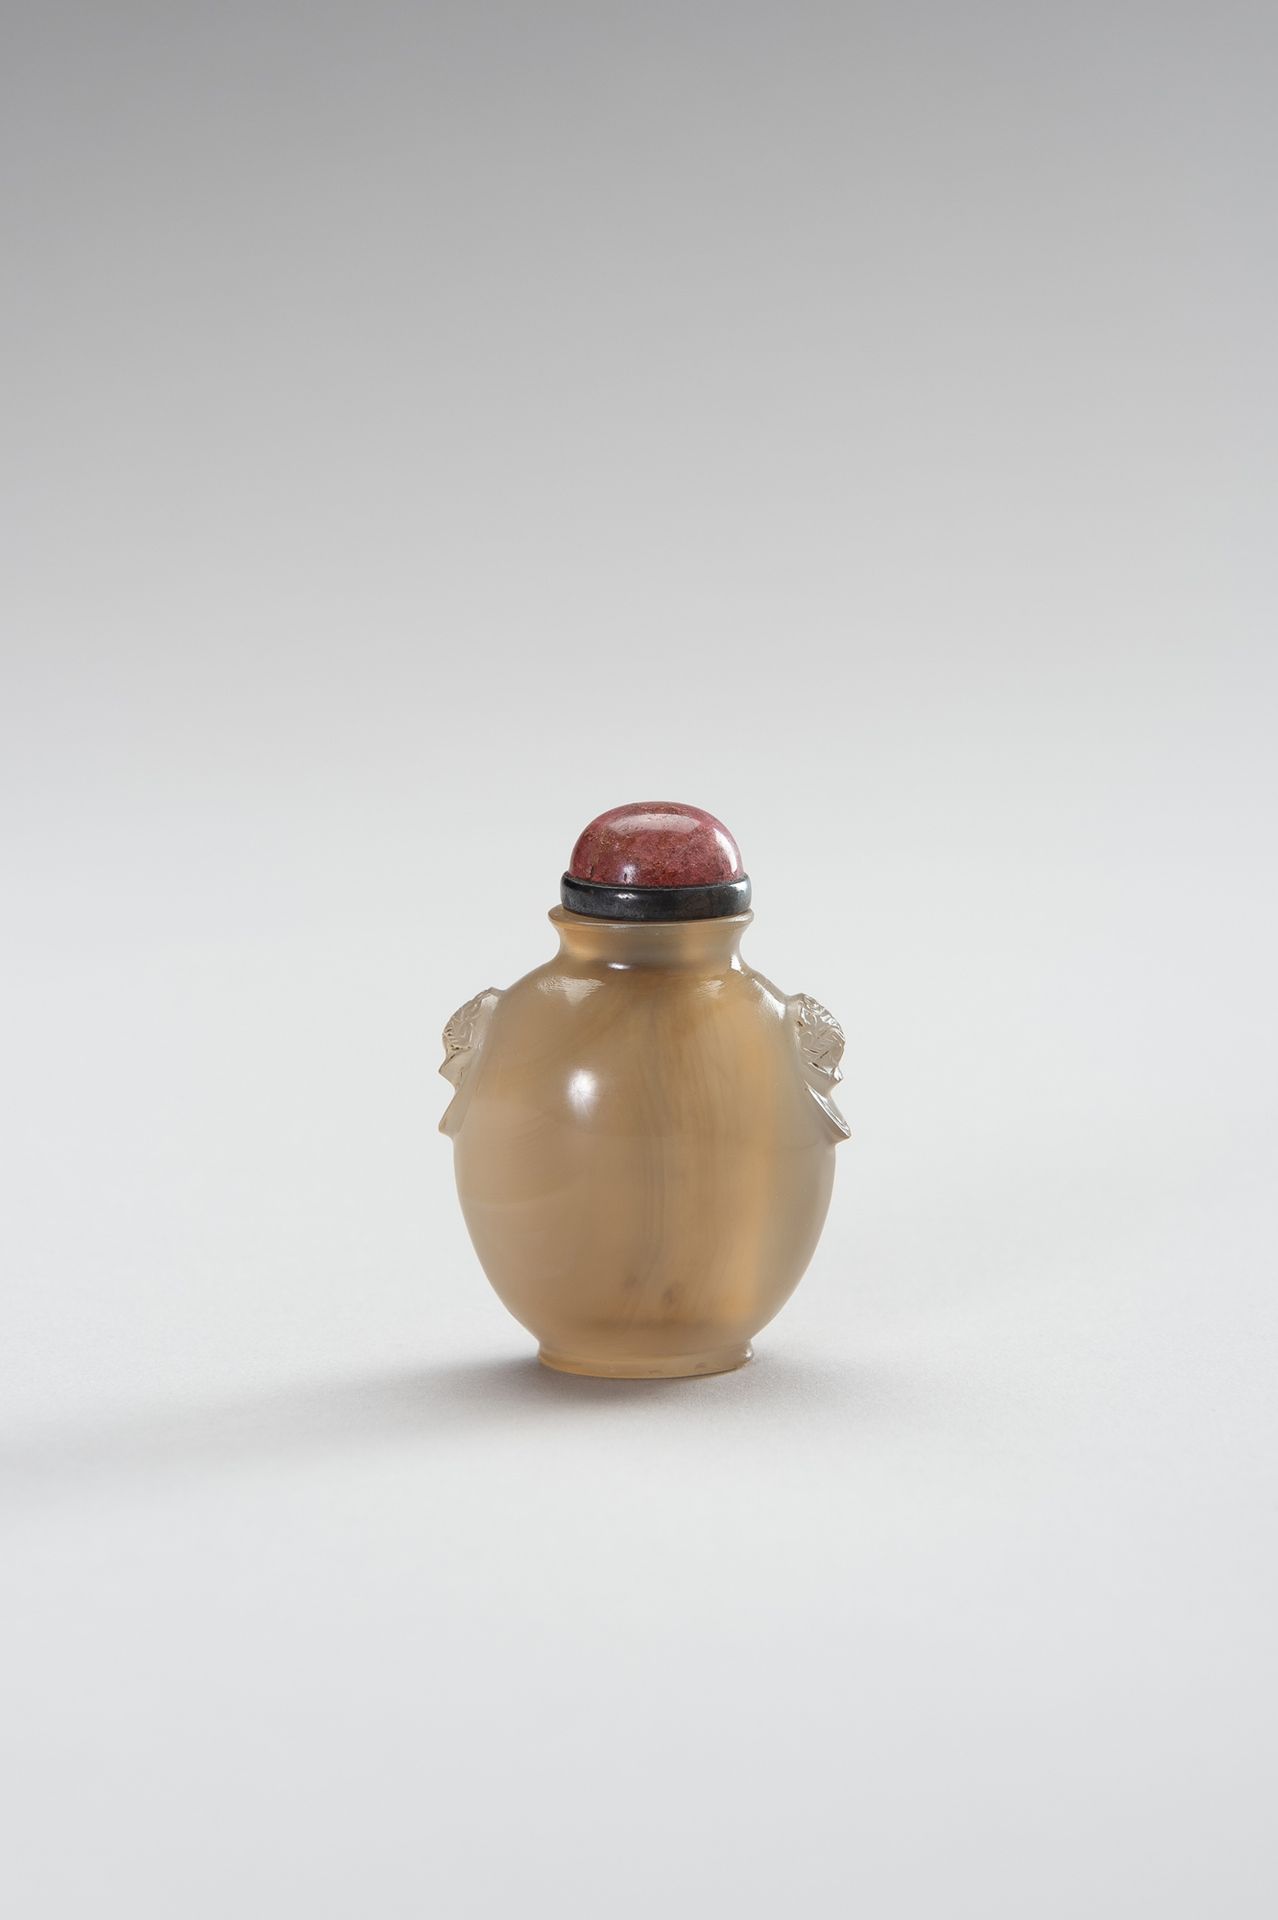 AN AGATE LADY’S SNUFF BOTTLE DAMENFLASCHE AUS Ahorn
China, Qing-Dynastie (1644-1&hellip;